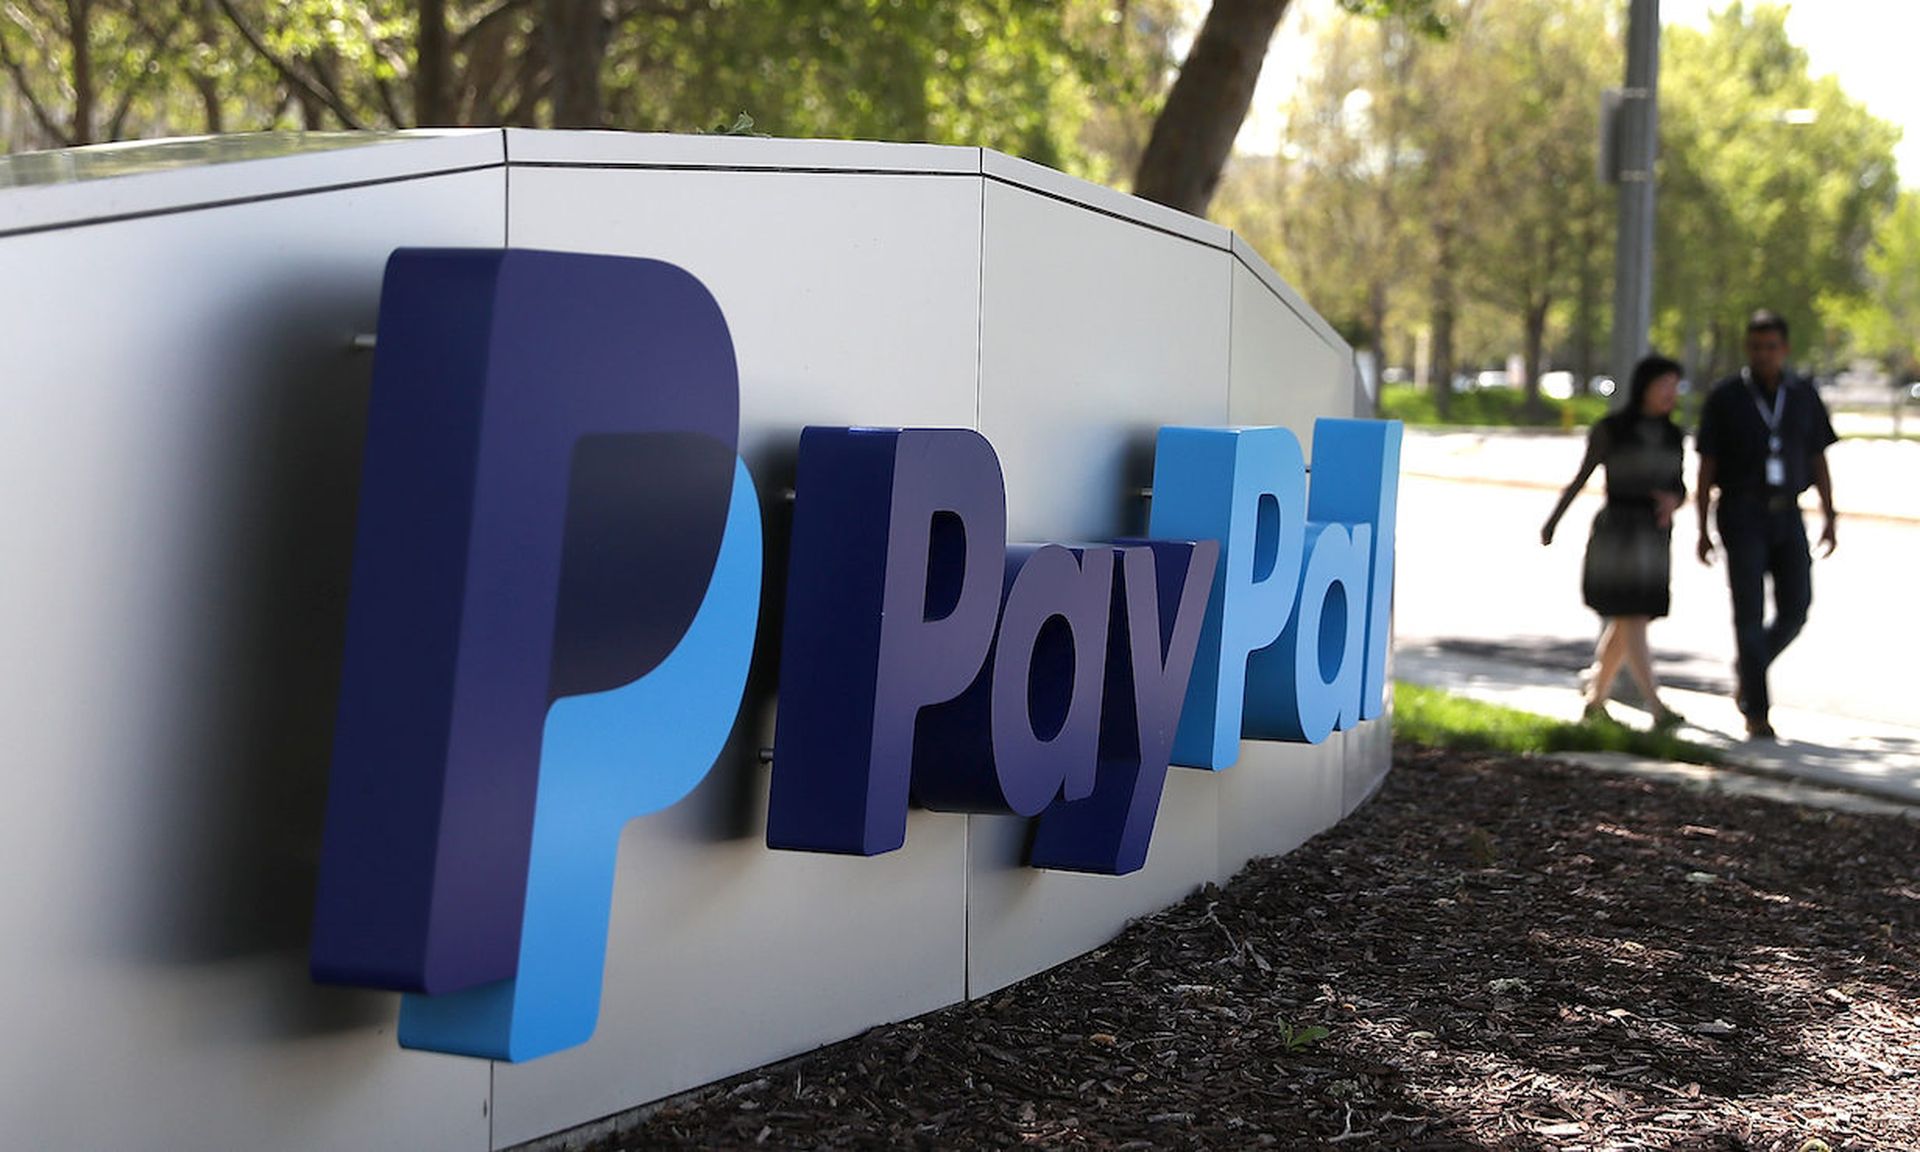 Today’s columnist, Sam Bakken of OneSpan, says that PayPal is one of several U.S. companies looking to create a financial “super app” that can manage the vast majority of a consumer’s banking, insurance, and financing apps. (Photo by Justin Sullivan/Getty Images)